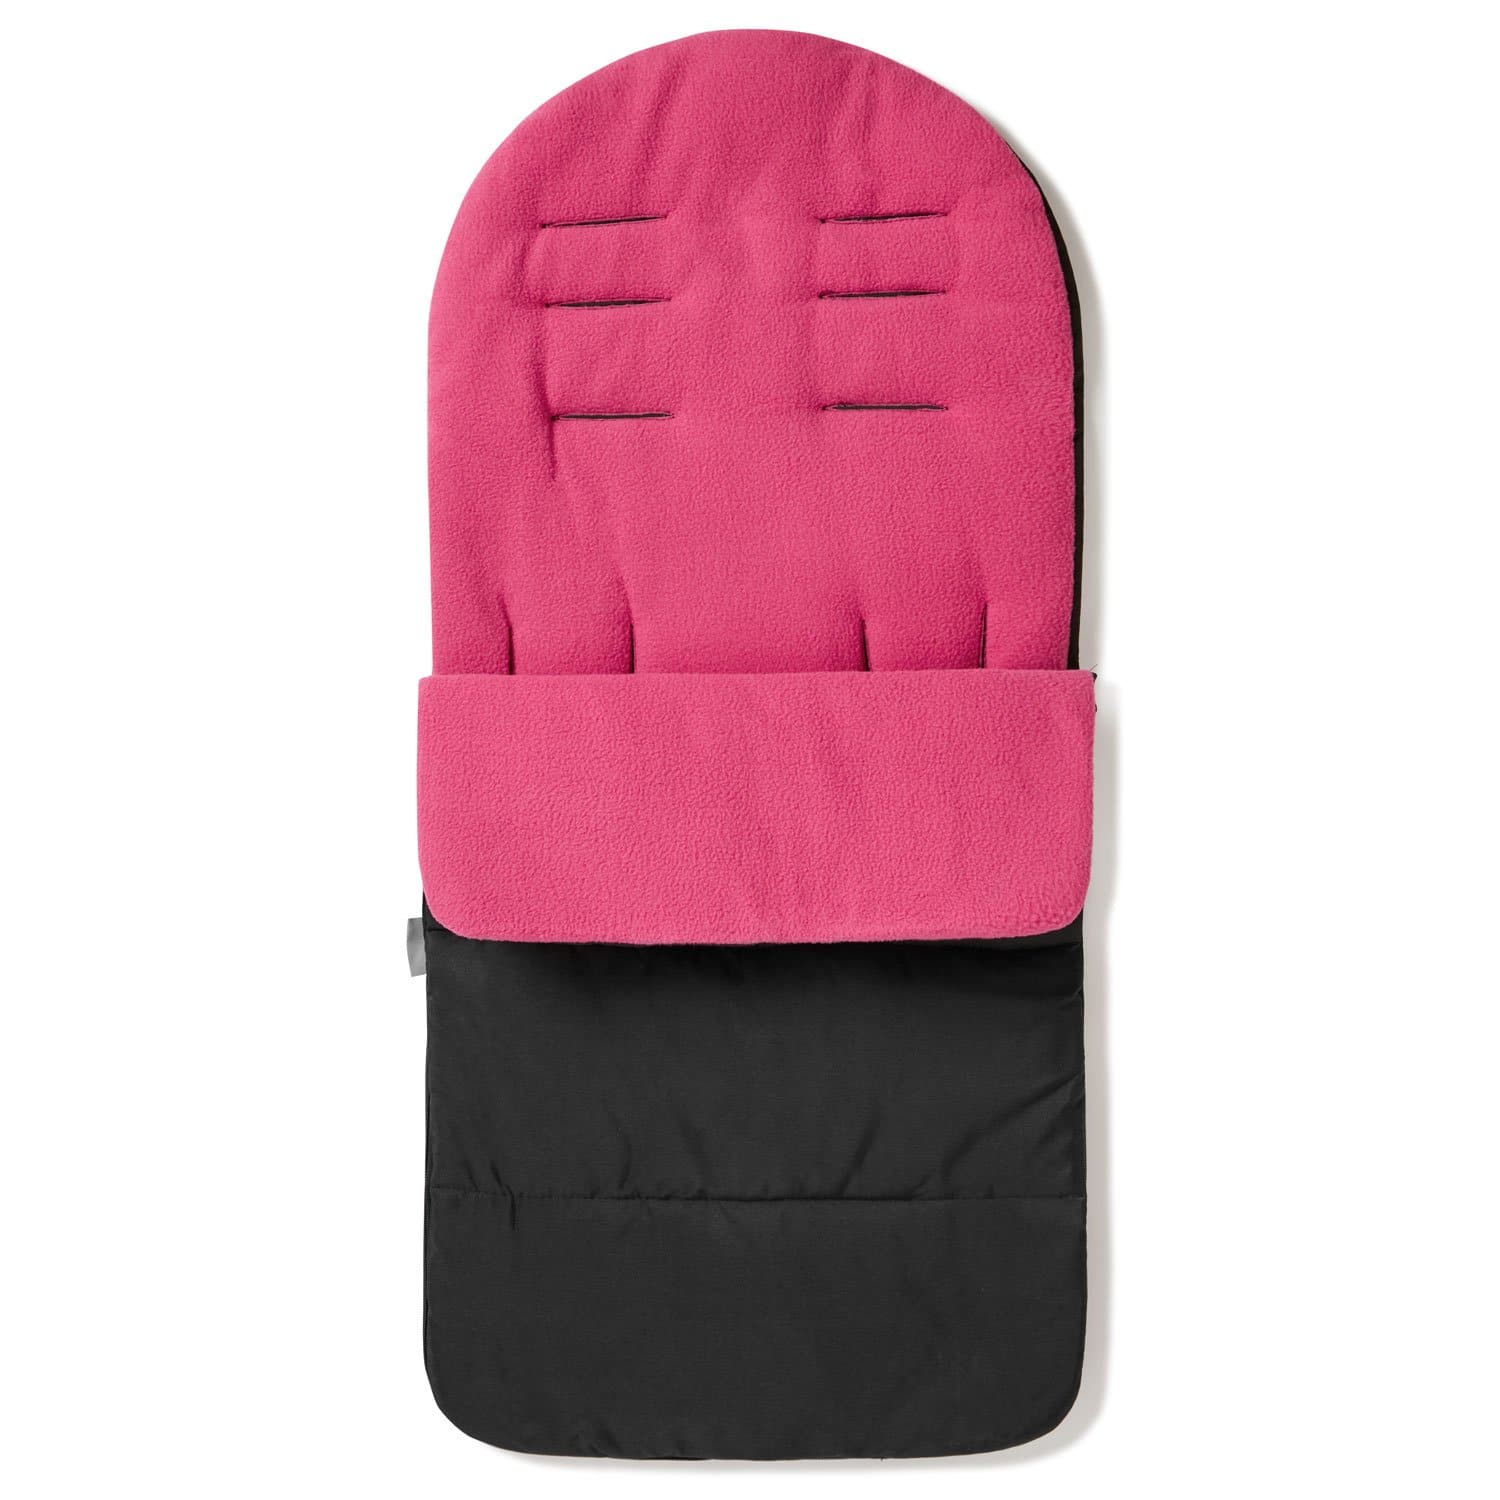 Premium Footmuff / Cosy Toes Compatible with Mee-Go - Pink Rose / Fits All Models | For Your Little One